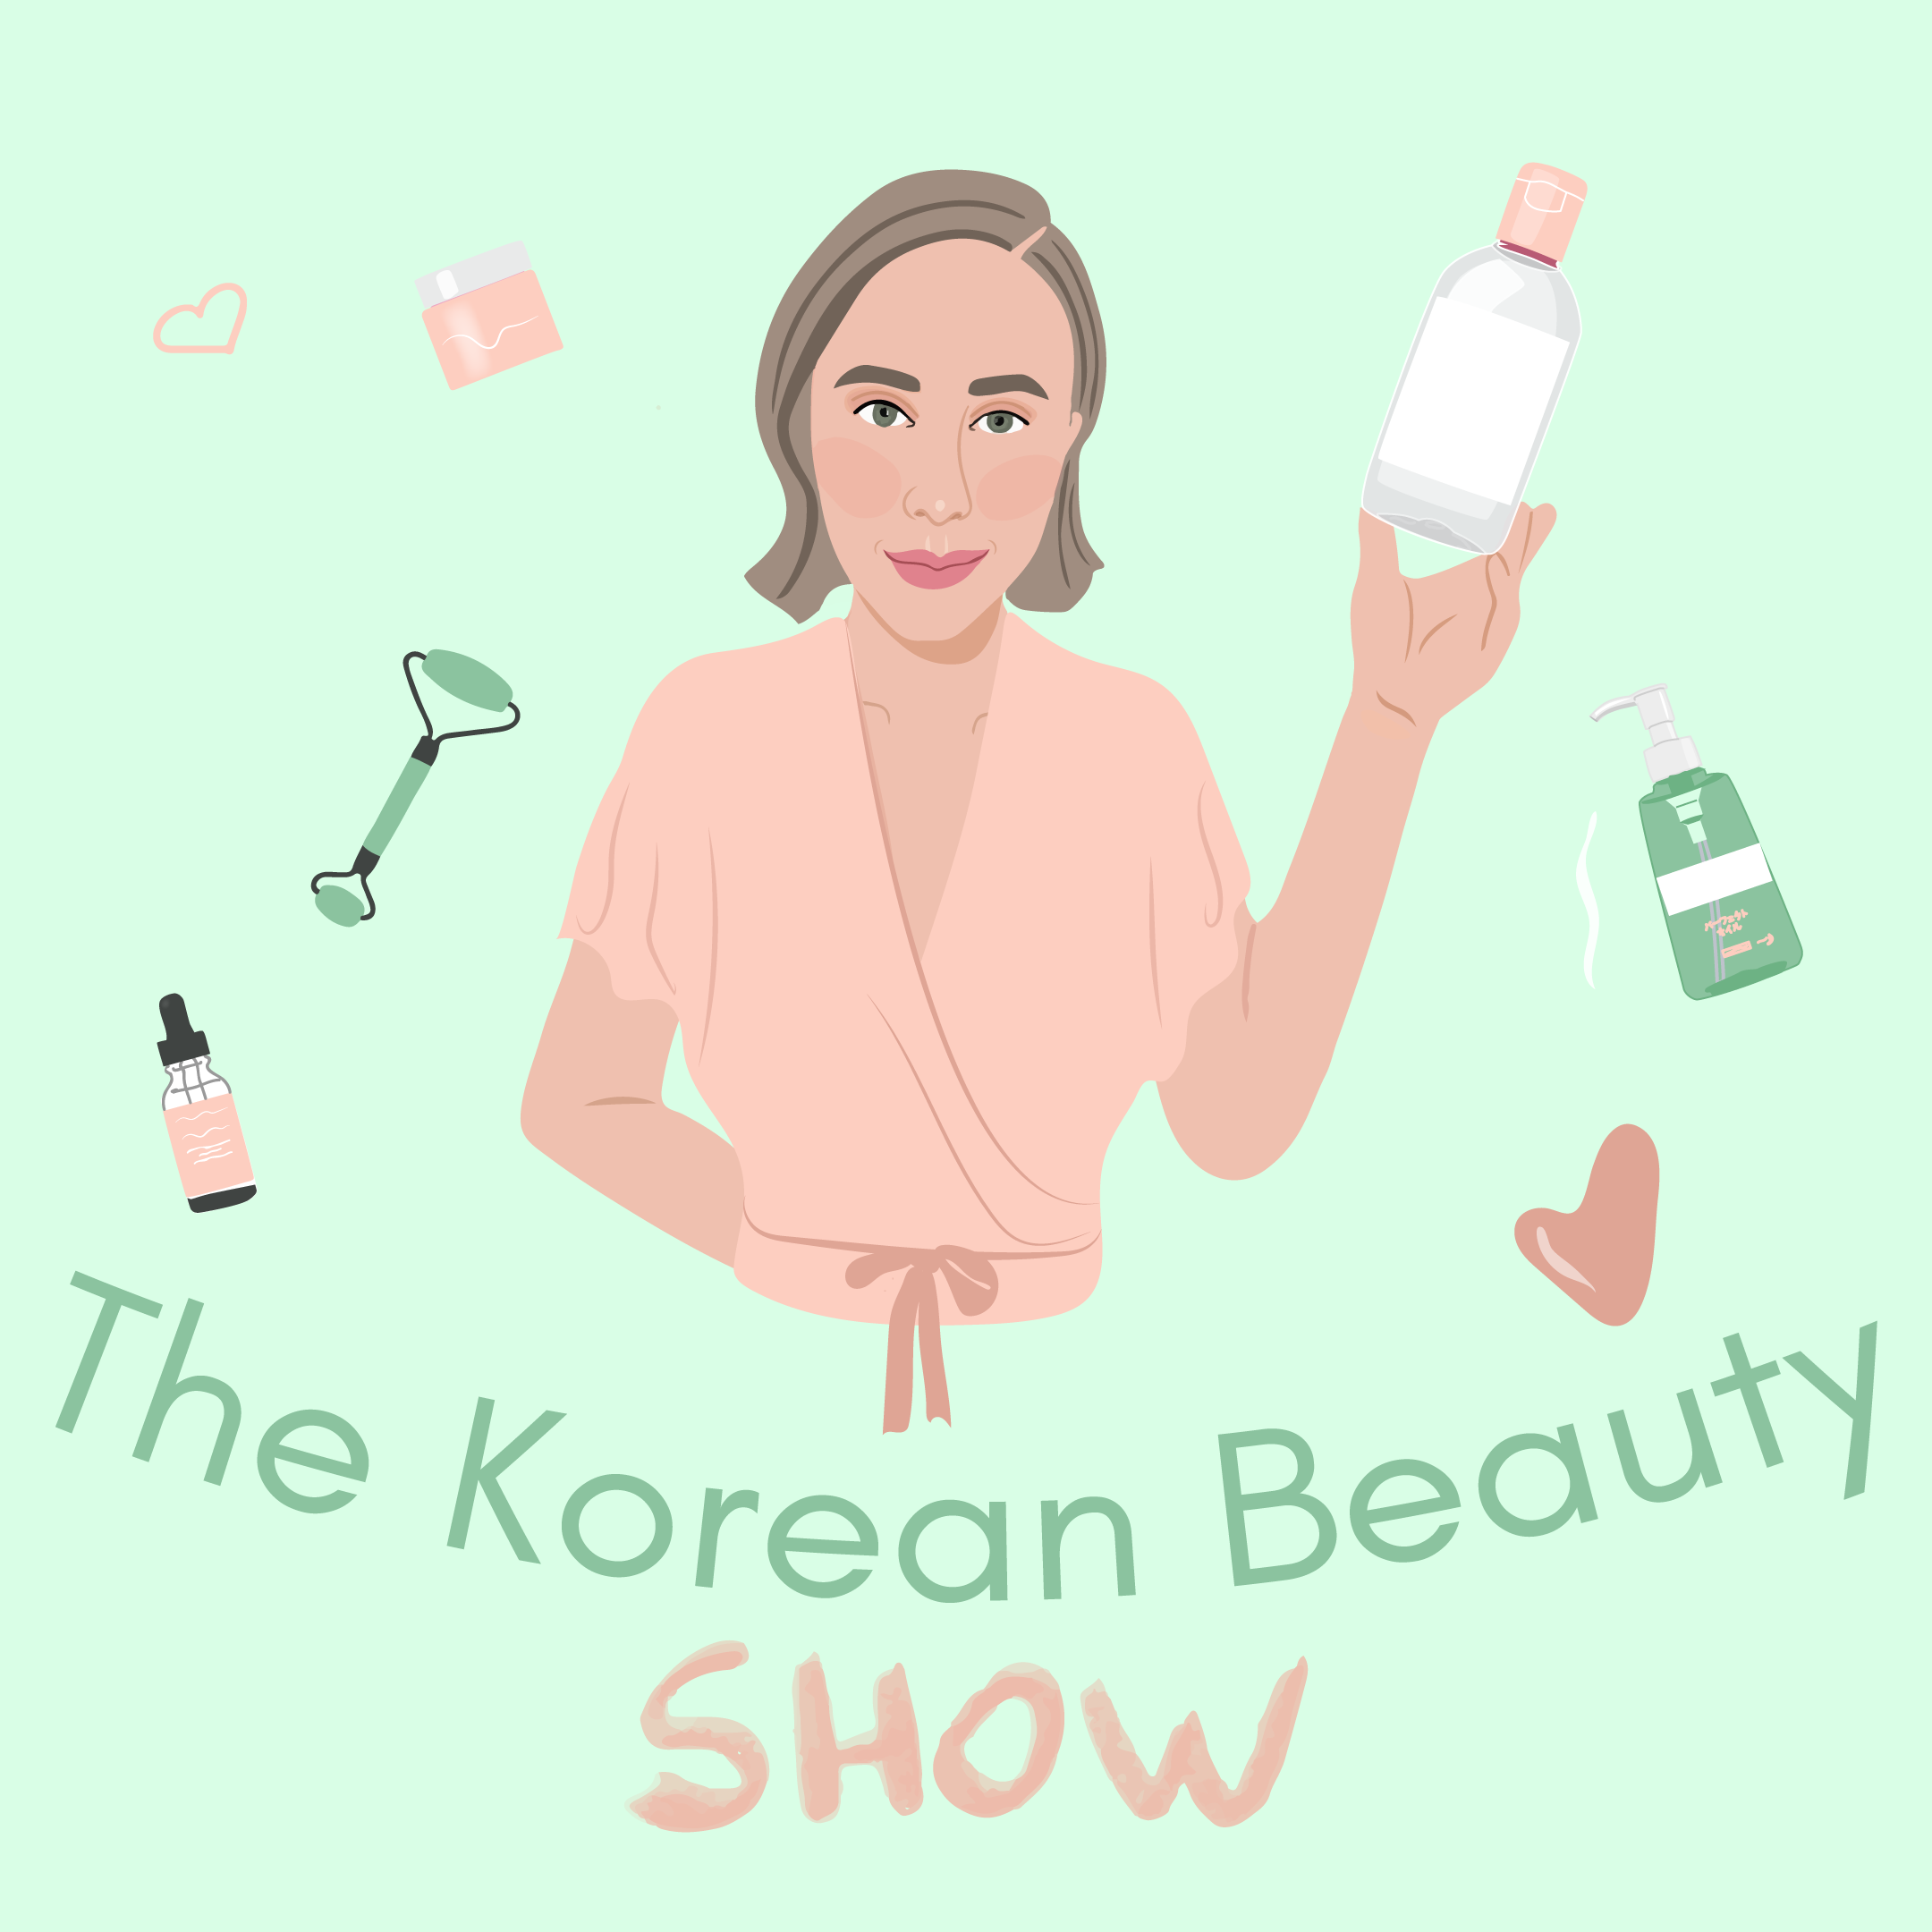 Are Korean Beauty Standards Changing in 2022?